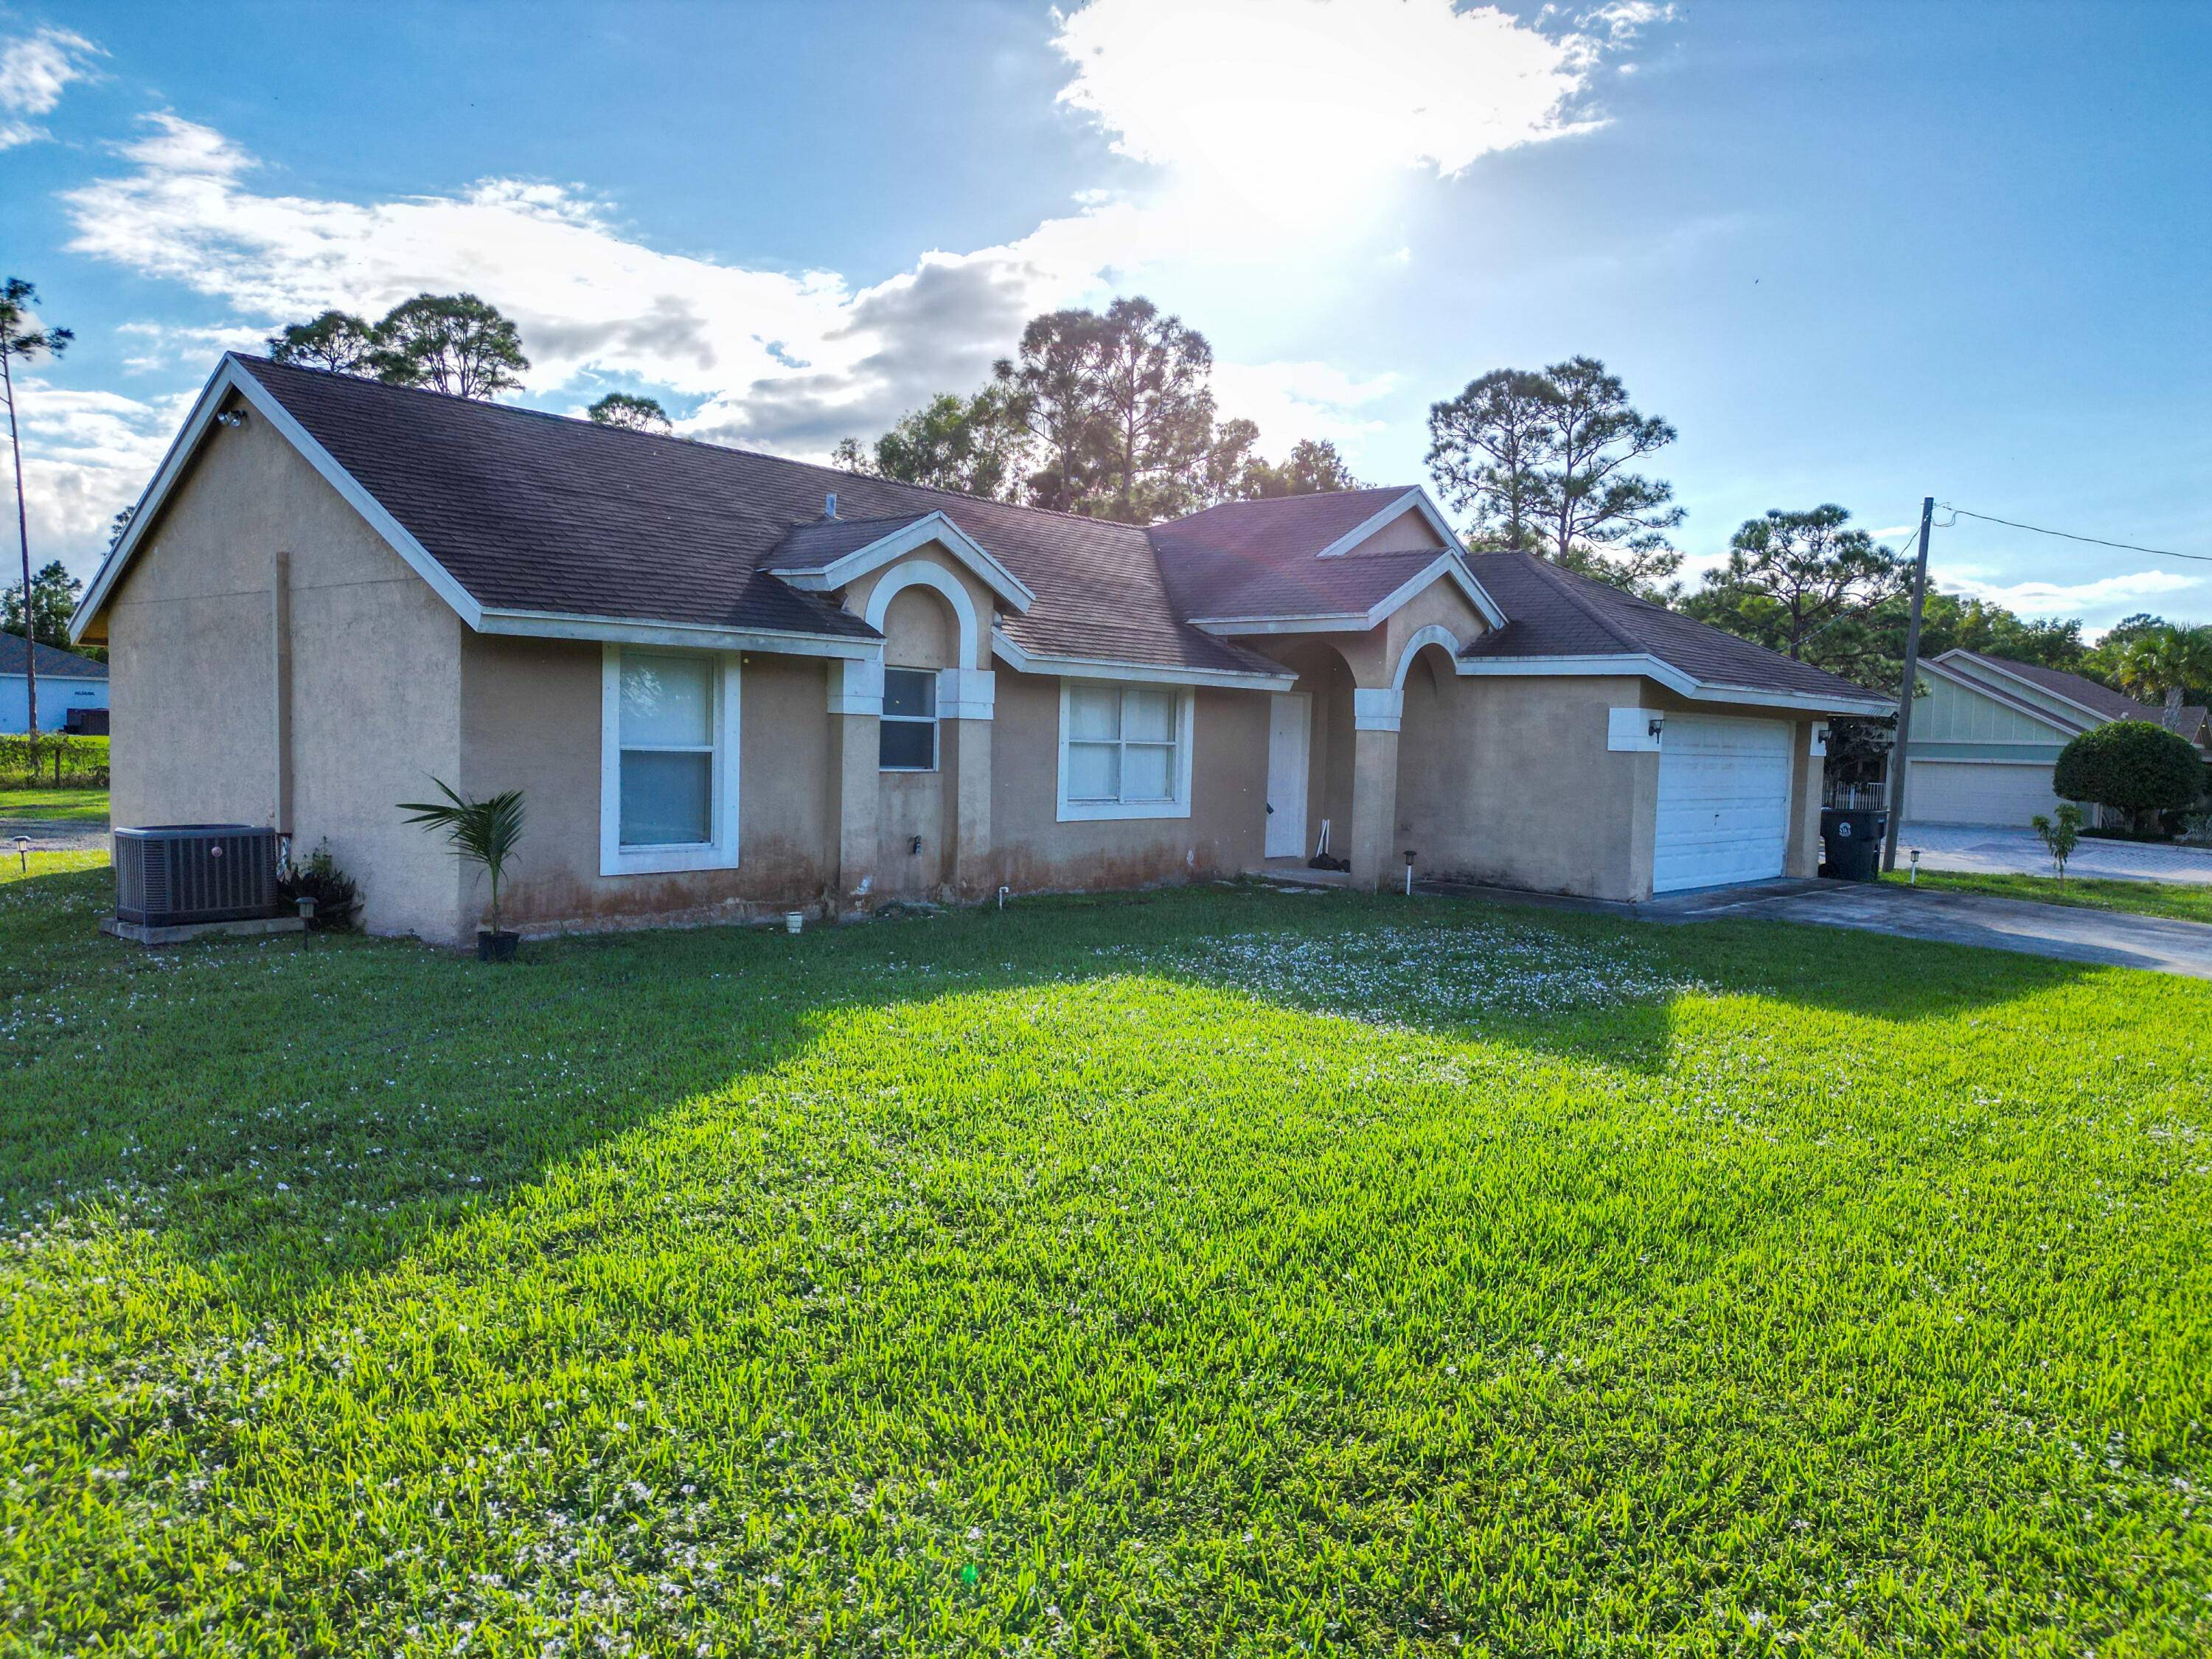 This corner single family unit with 3 BED and 2 bath, is in the middle of the Florida Green.